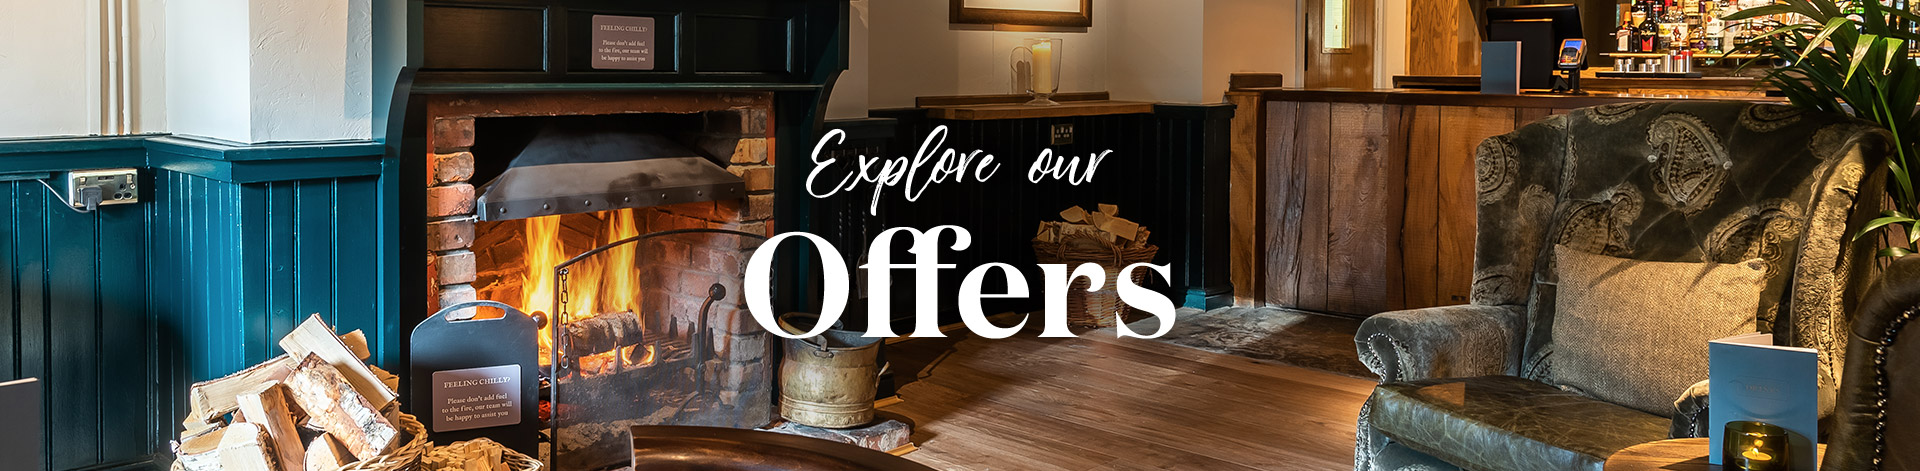 Our latest offers at The Anchor Inn